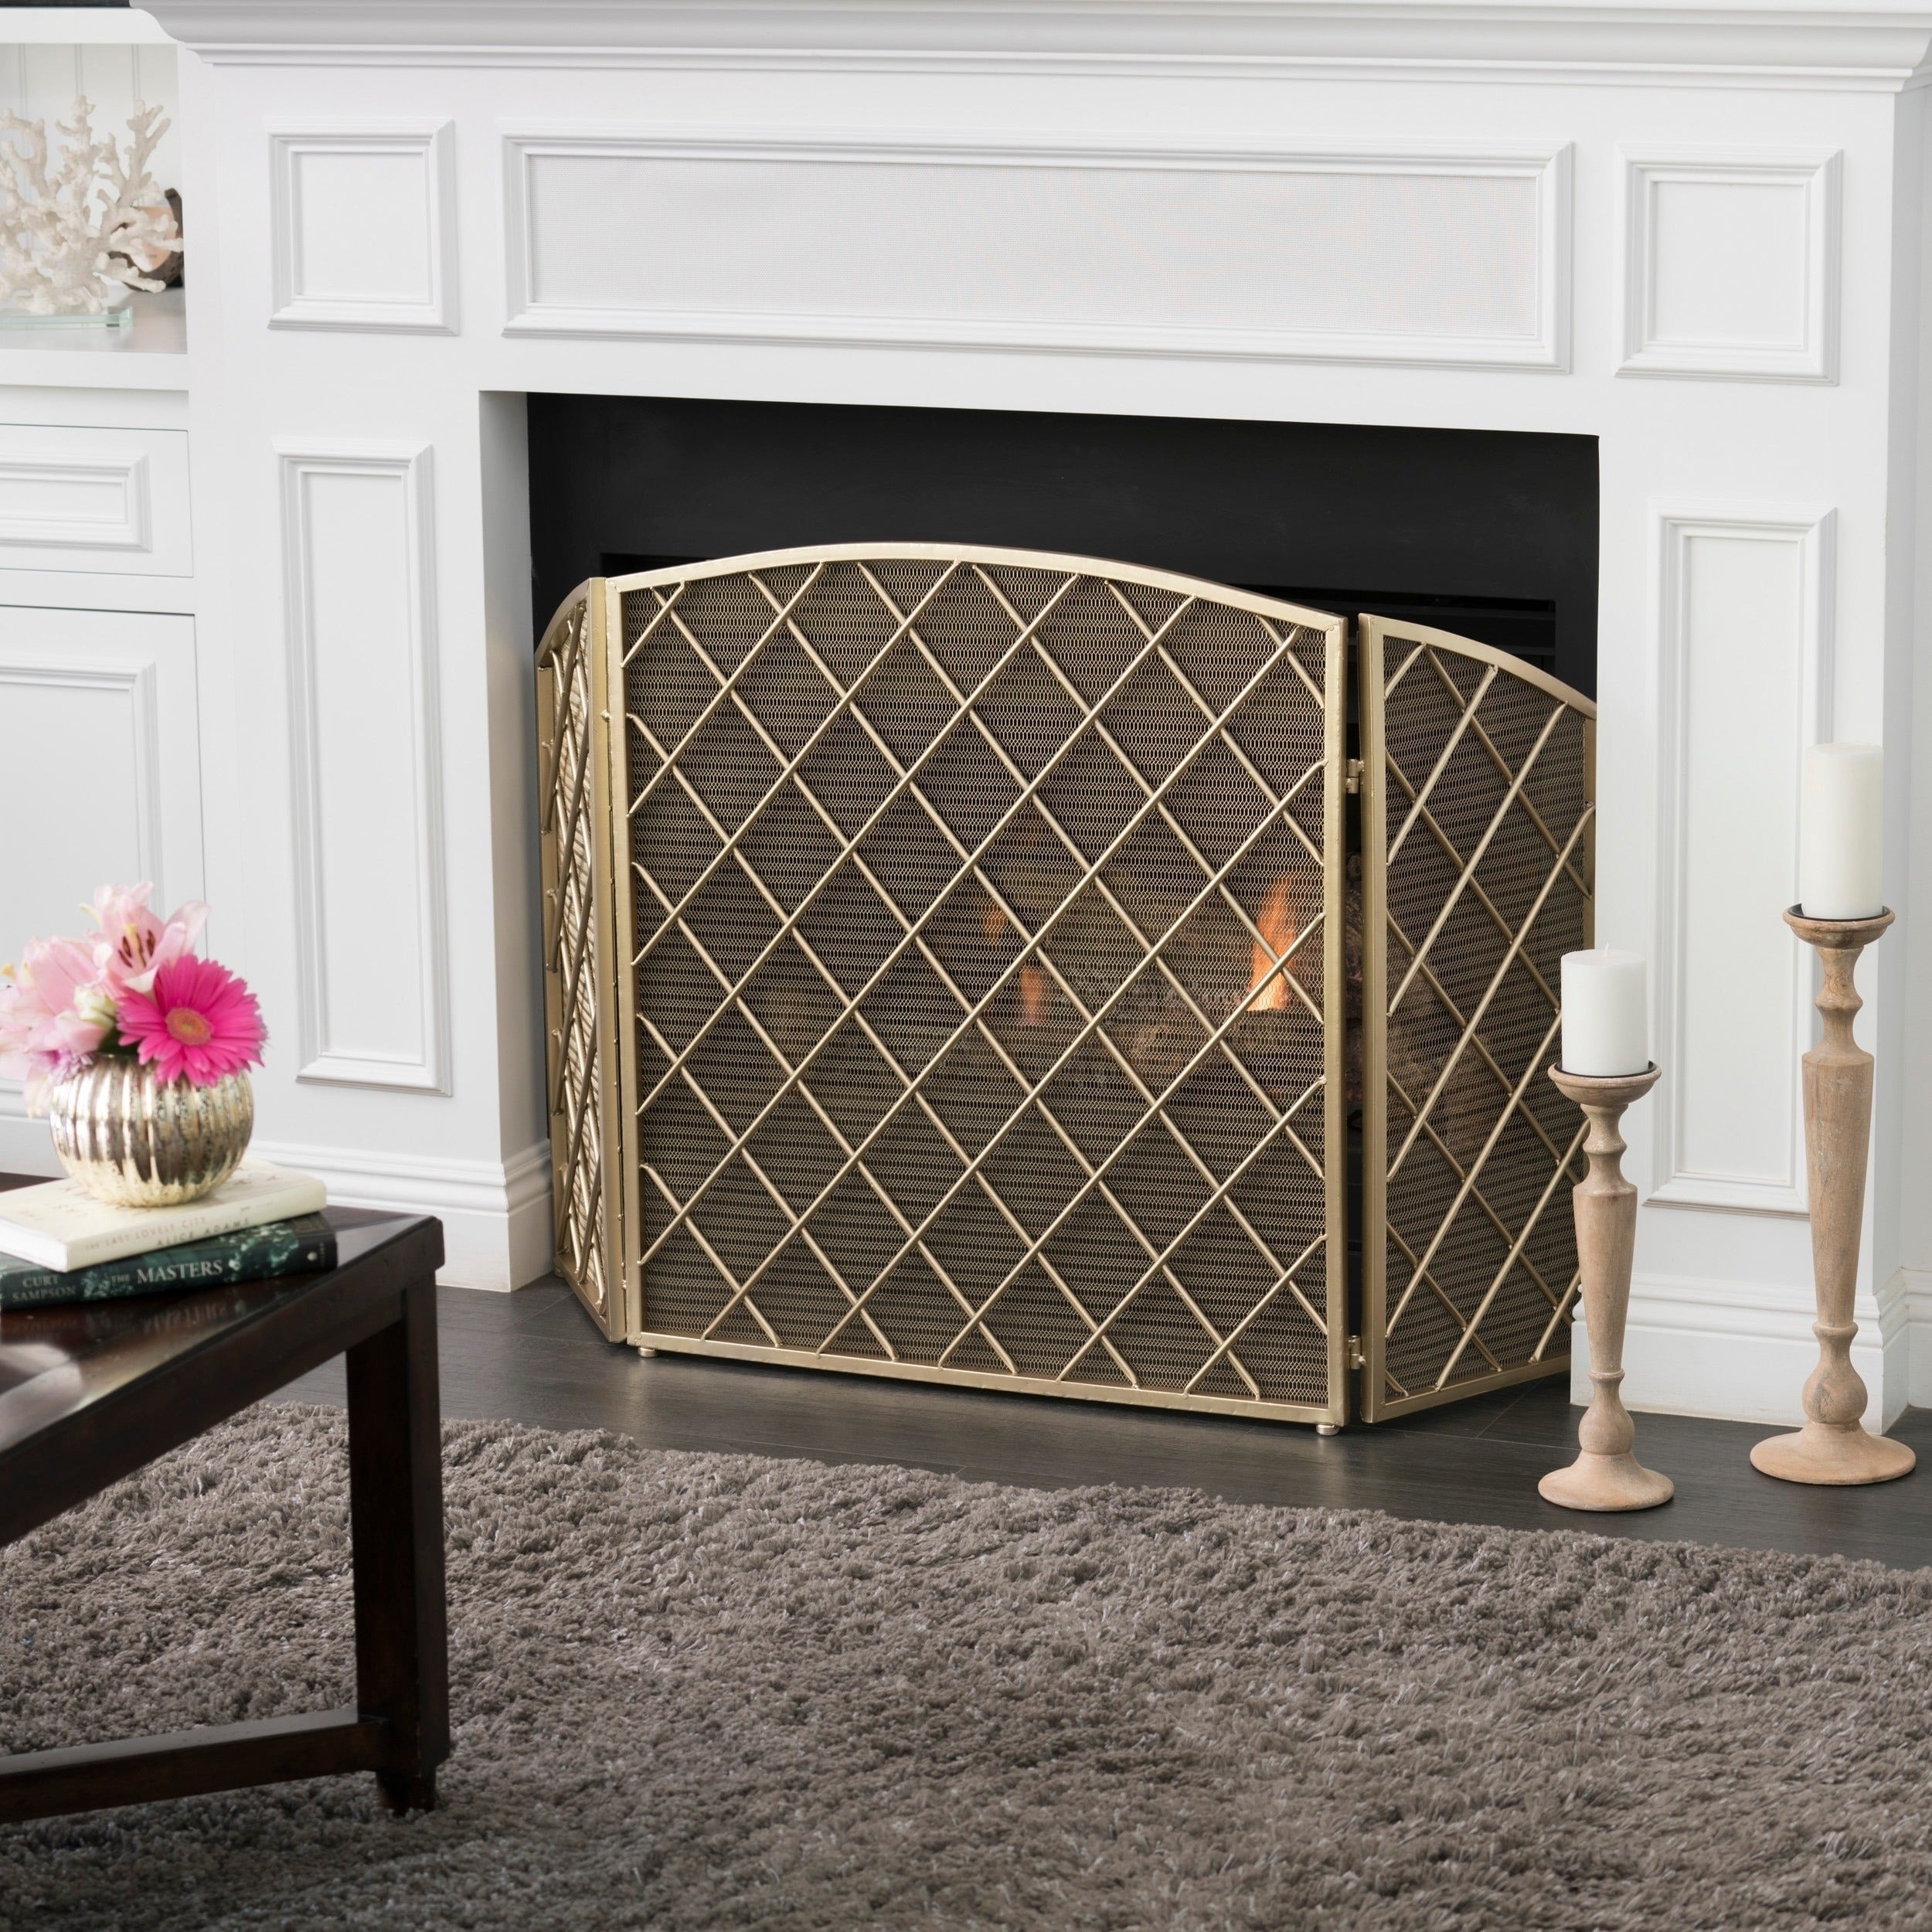 Christopher Knight Home Amiyah Panelled Iron Fireplace Screen, Gold - 1